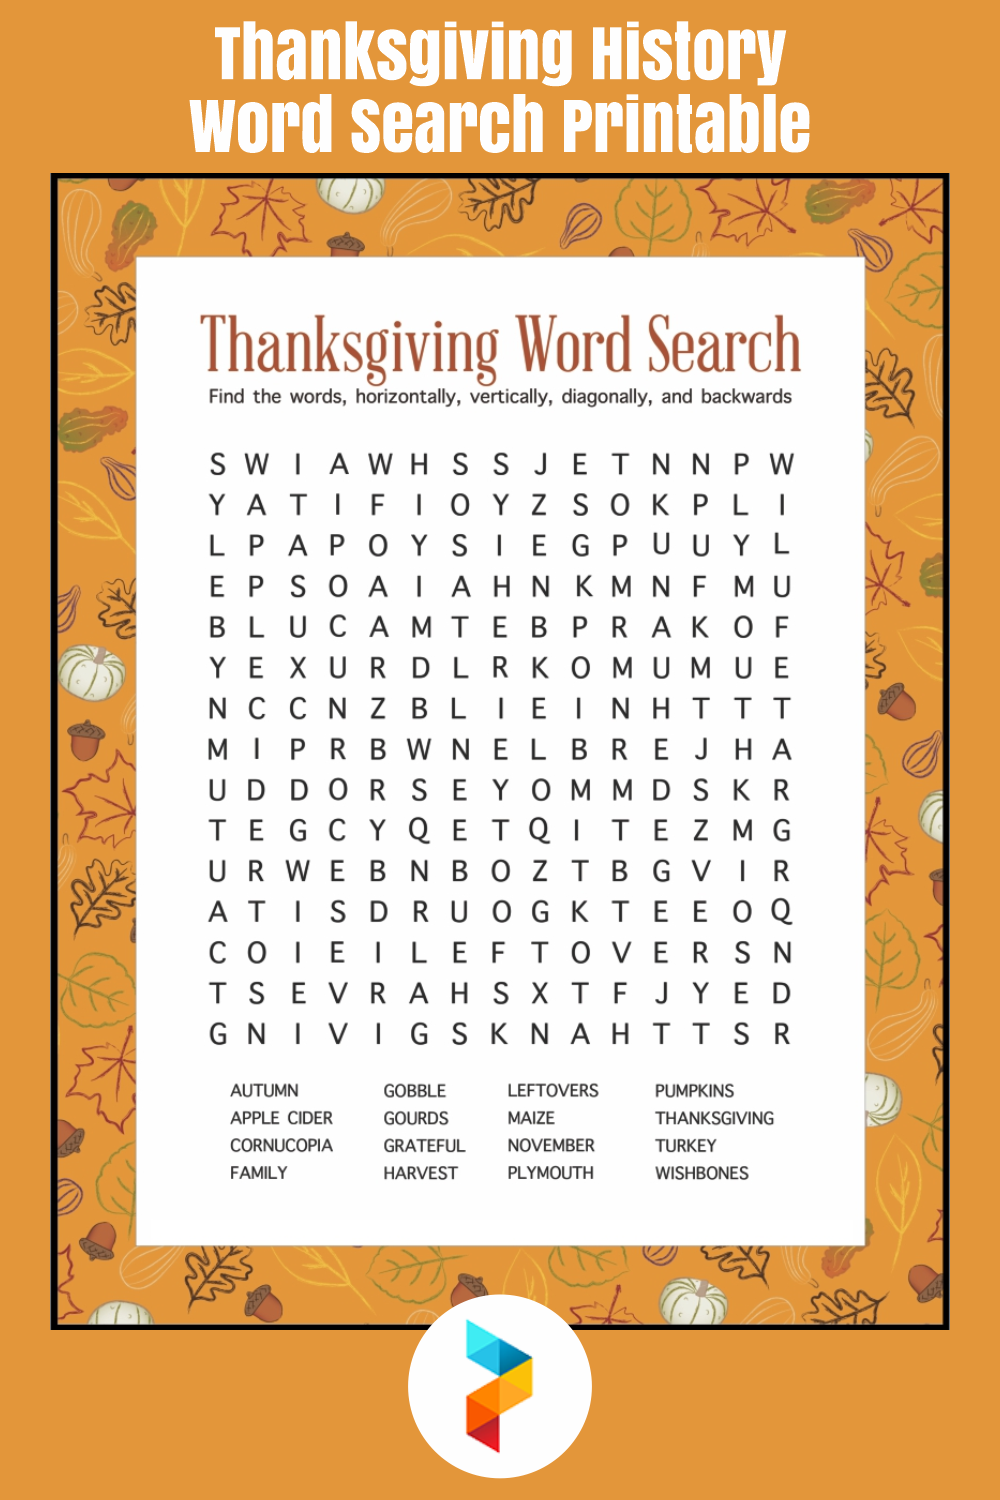 Thanksgiving History Word Search Printable